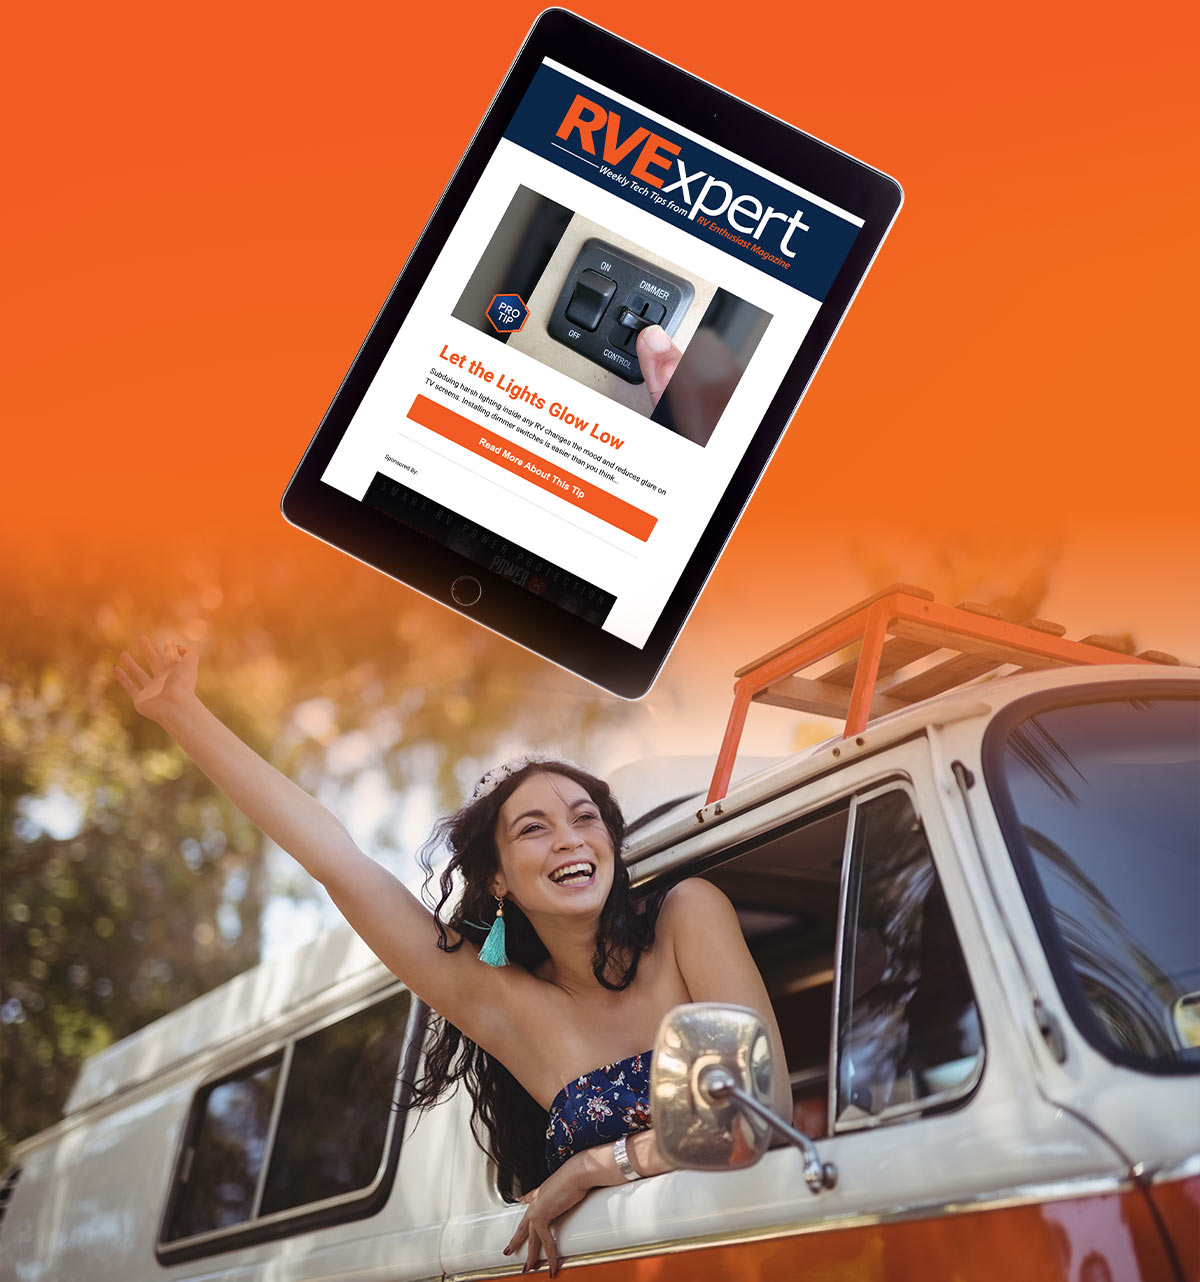 RVExpert newsletter on a tablet overlaid on an image of a happy traveling woman